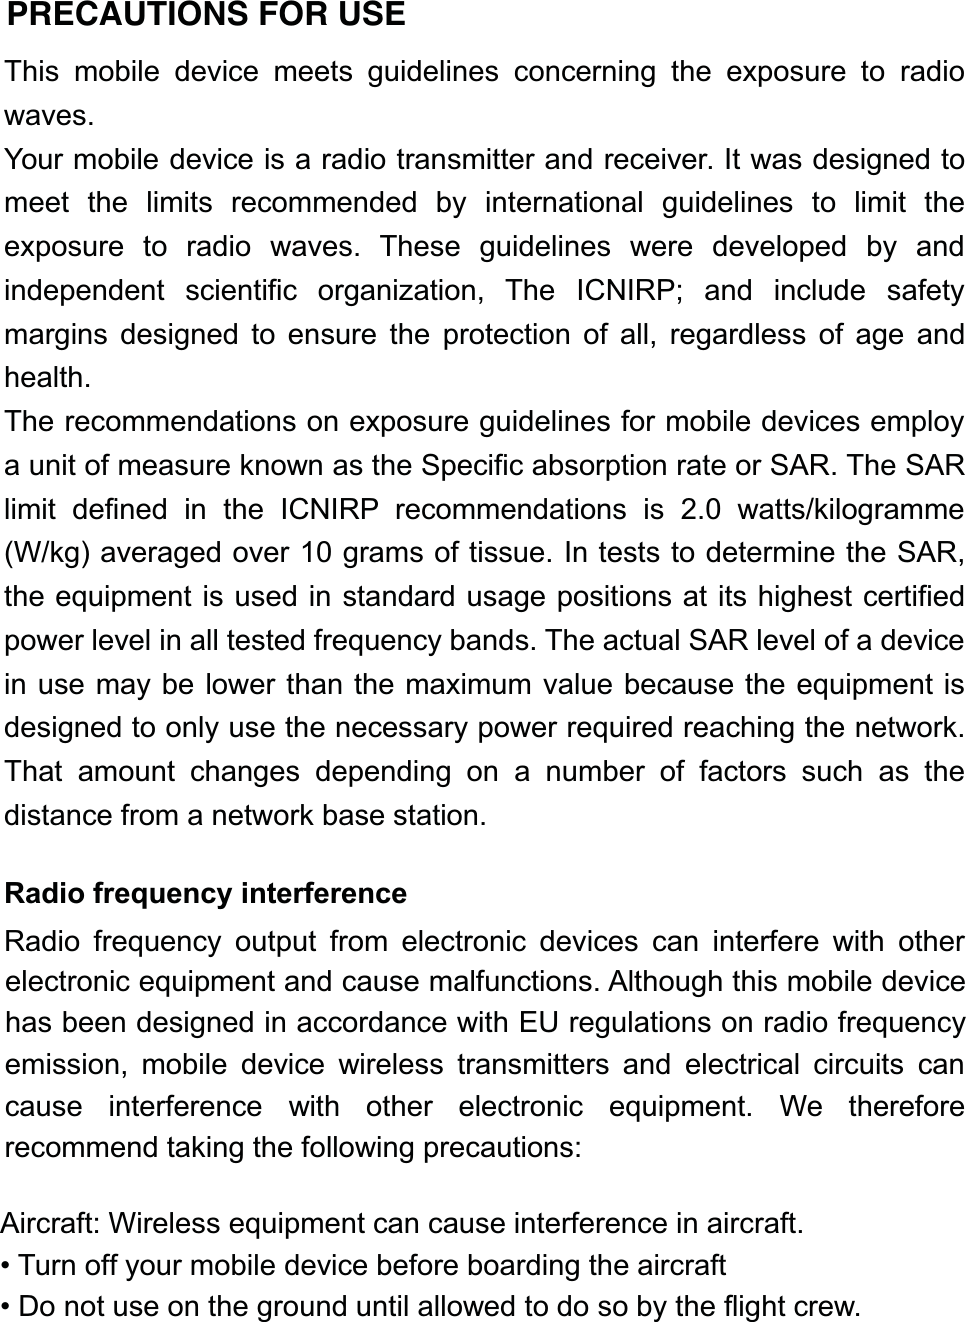 This mobile device meets guidelines concerning the exposure to radiowaves.Your mobile device is a radio transmitter and receiver. It was designed tomeet the limits recommended by international guidelines to limit theexposure to radio waves. These guidelines were developed by andindependent scientific organization, The ICNIRP; and include safetymargins designed to ensure the protection of all, regardless of age andhealth.The recommendations on exposure guidelines for mobile devices employa unit of measure known as the Specific absorption rate or SAR. The SARlimit defined in the ICNIRP recommendations is 2.0 watts/kilogramme(W/kg) averaged over 10 grams of tissue. In tests to determine the SAR,the equipment is used in standard usage positions at its highest certifiedpower level in all tested frequency bands. The actual SAR level of a devicein use may be lower than the maximum value because the equipment isdesigned to only use the necessary power required reaching the network.That amount changes depending on a number of factors such as thedistance from a network base station.Radio frequency interferenceRadio frequency output from electronic devices can interfere with otherPRECAUTIONS FOR USEelectronic equipment and cause malfunctions. Although this mobile devicehas been designed in accordance with EU regulations on radio frequencyemission, mobile device wireless transmitters and electrical circuits cancause interference with other electronic equipment. We thereforerecommend taking the following precautions:Aircraft: Wireless equipment can cause interference in aircraft. Turn off your mobile device before boarding the aircraft Do not use on the ground until allowed to do so by the flight crew.